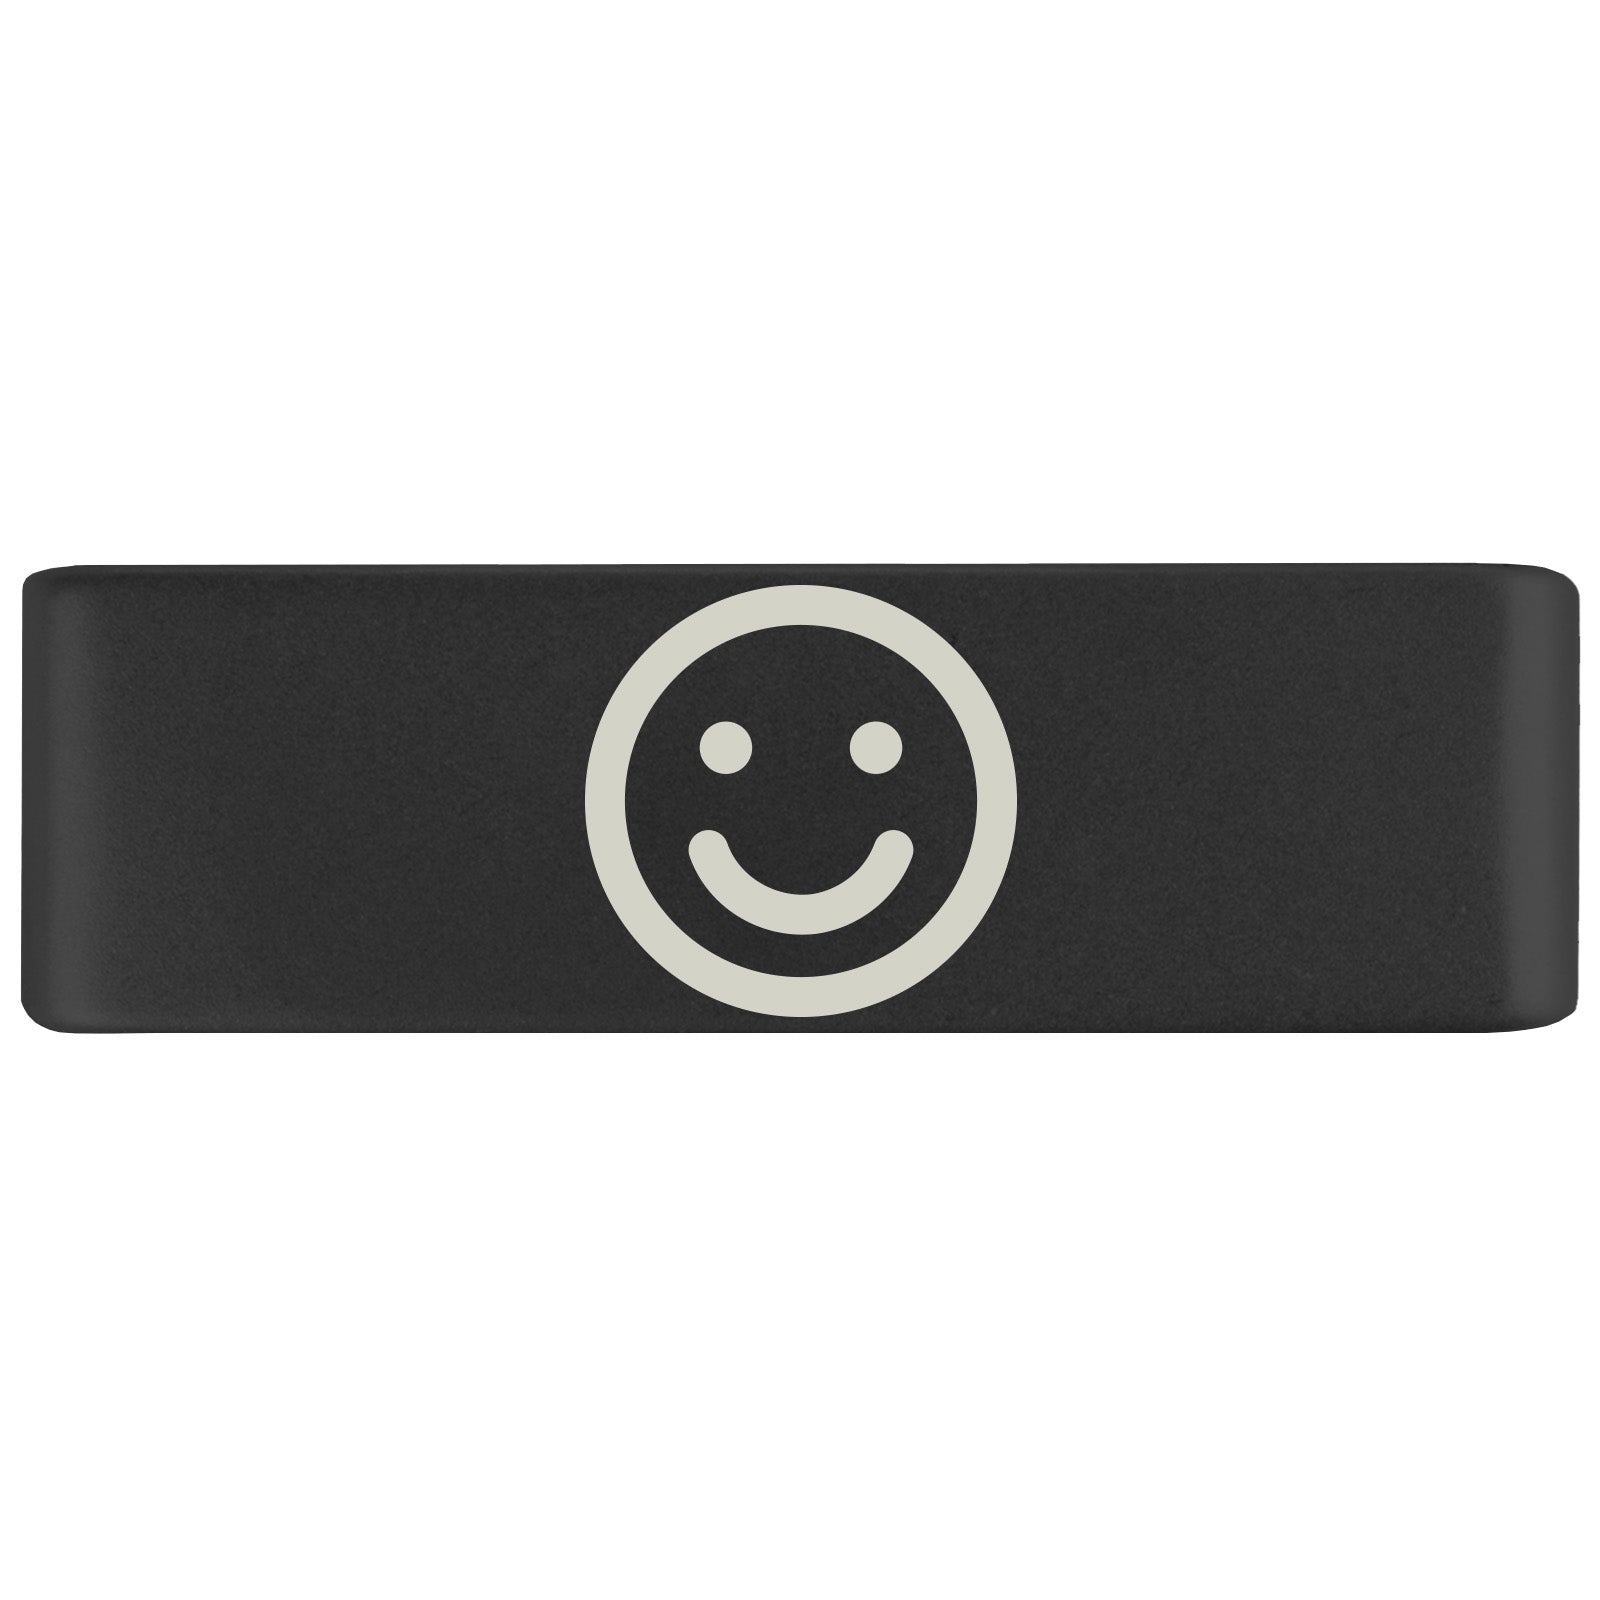 Smiley Face Badge Badge 19mm - ROAD iD